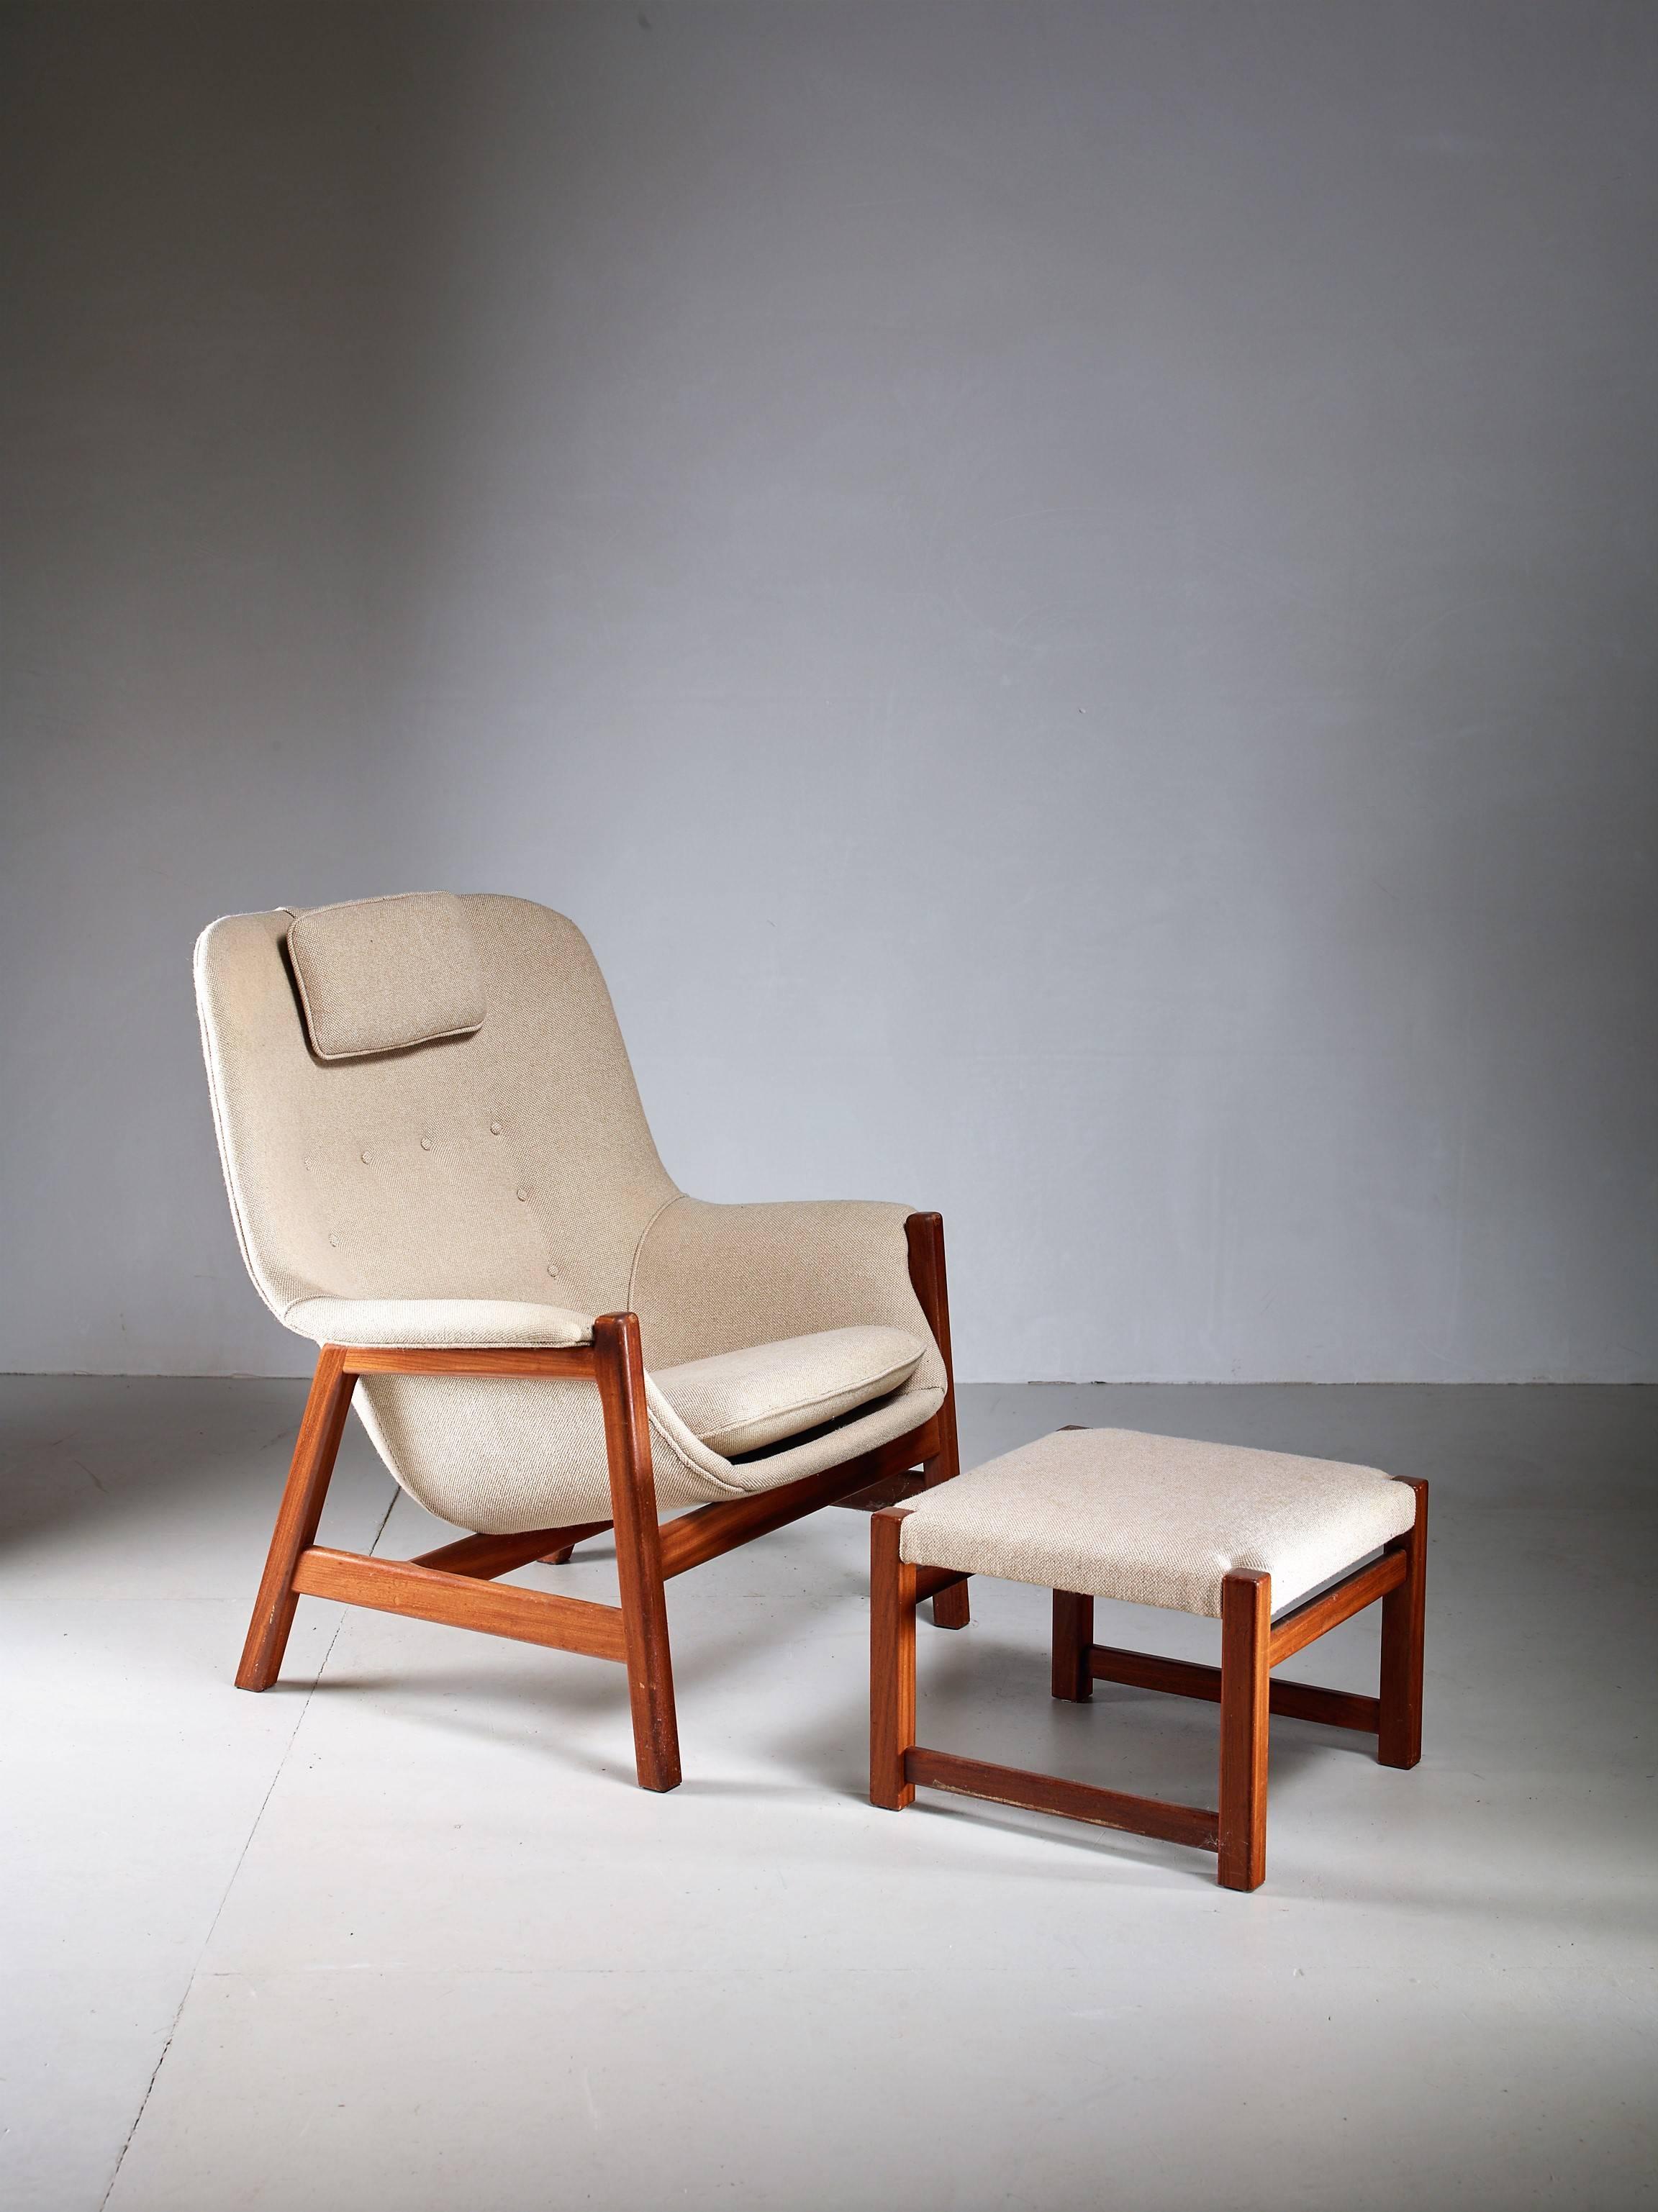 A 1950s Finnish lounge chair with matching ottoman by Carl-Gustav Hiort af Ornäs. Both items are made of mahogany and are professionally re-upholstered with a light grey fabric.
The chair is marked with 'Hiort Tuote Valmistaja Puunveistos